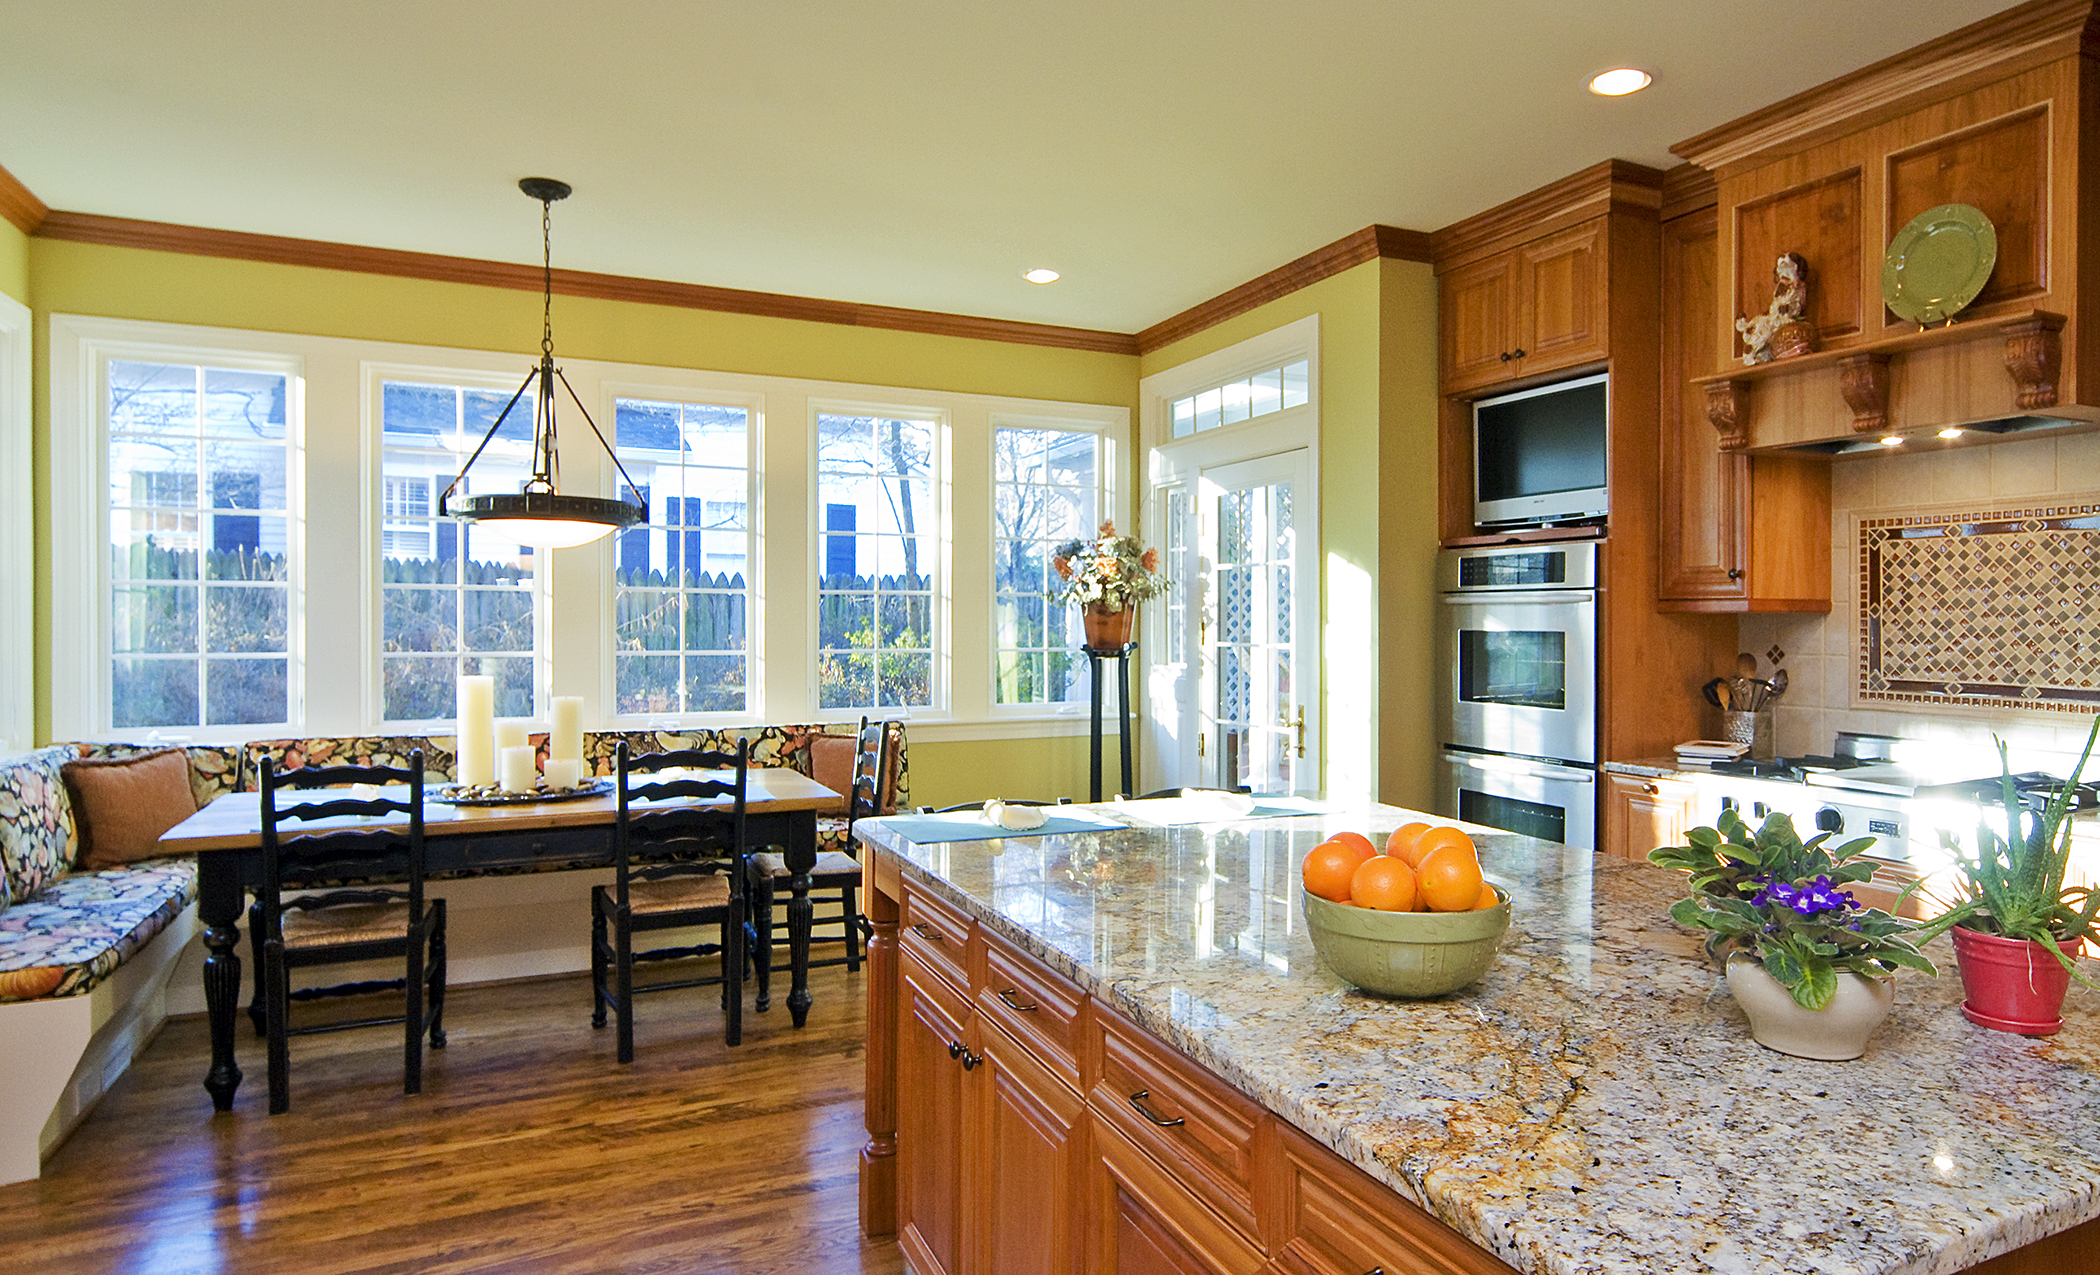 A bank of windows adds much to this remodeled kitchen